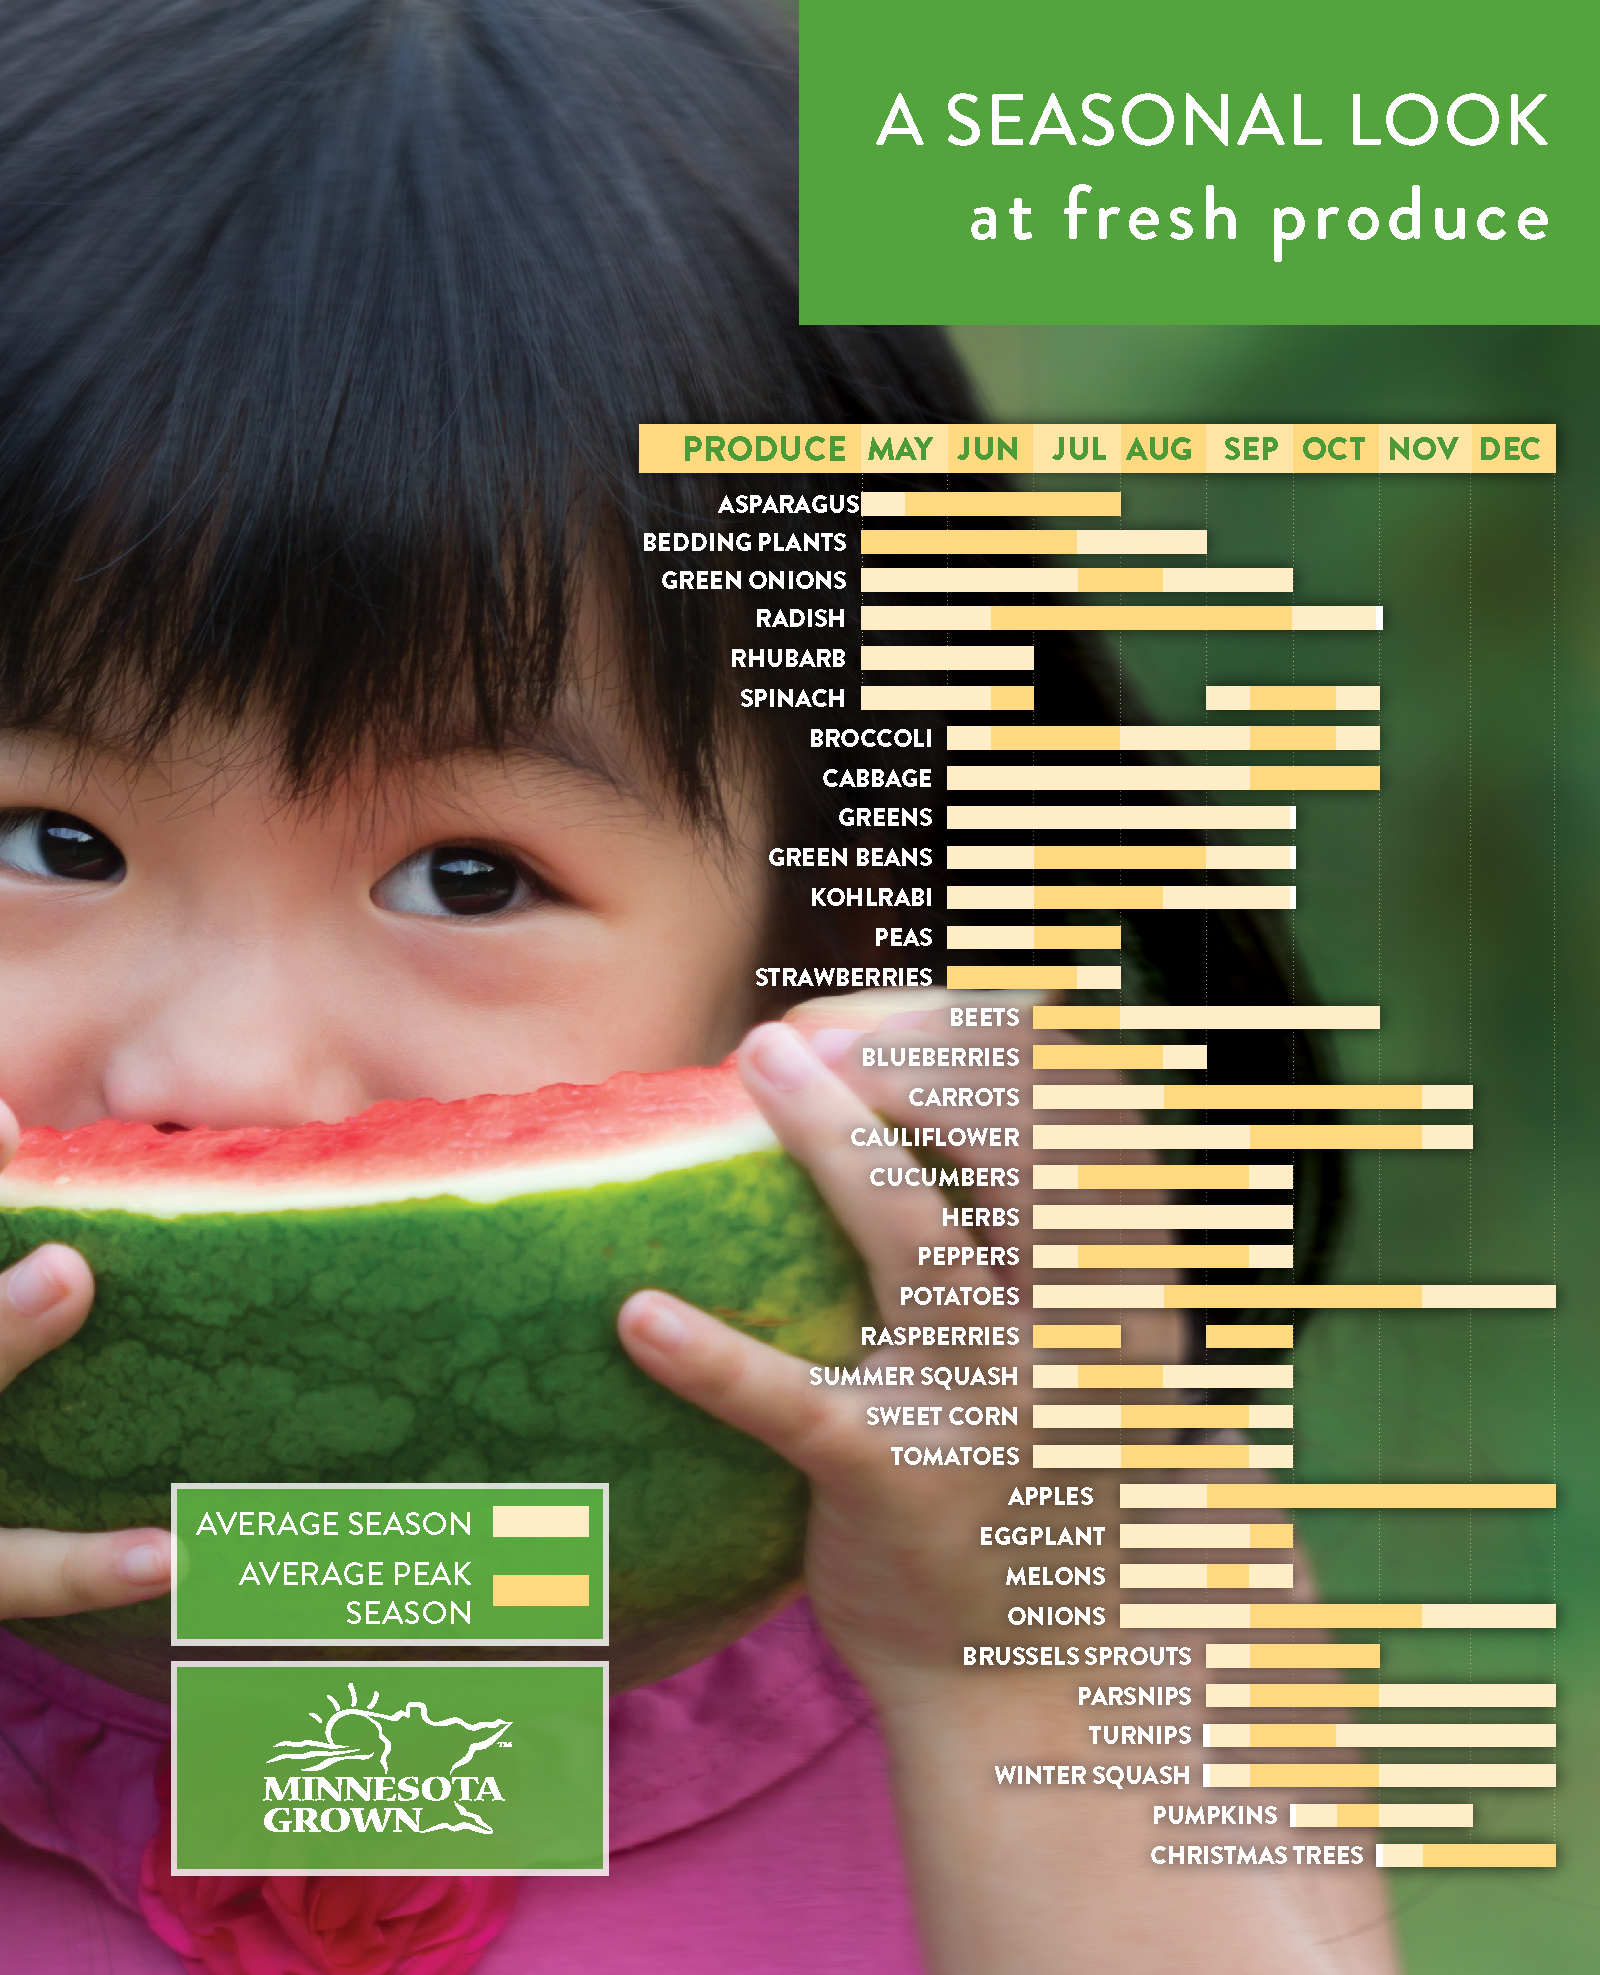 PIcture of a young girl biting into watermelon beside the seasonal produce chart